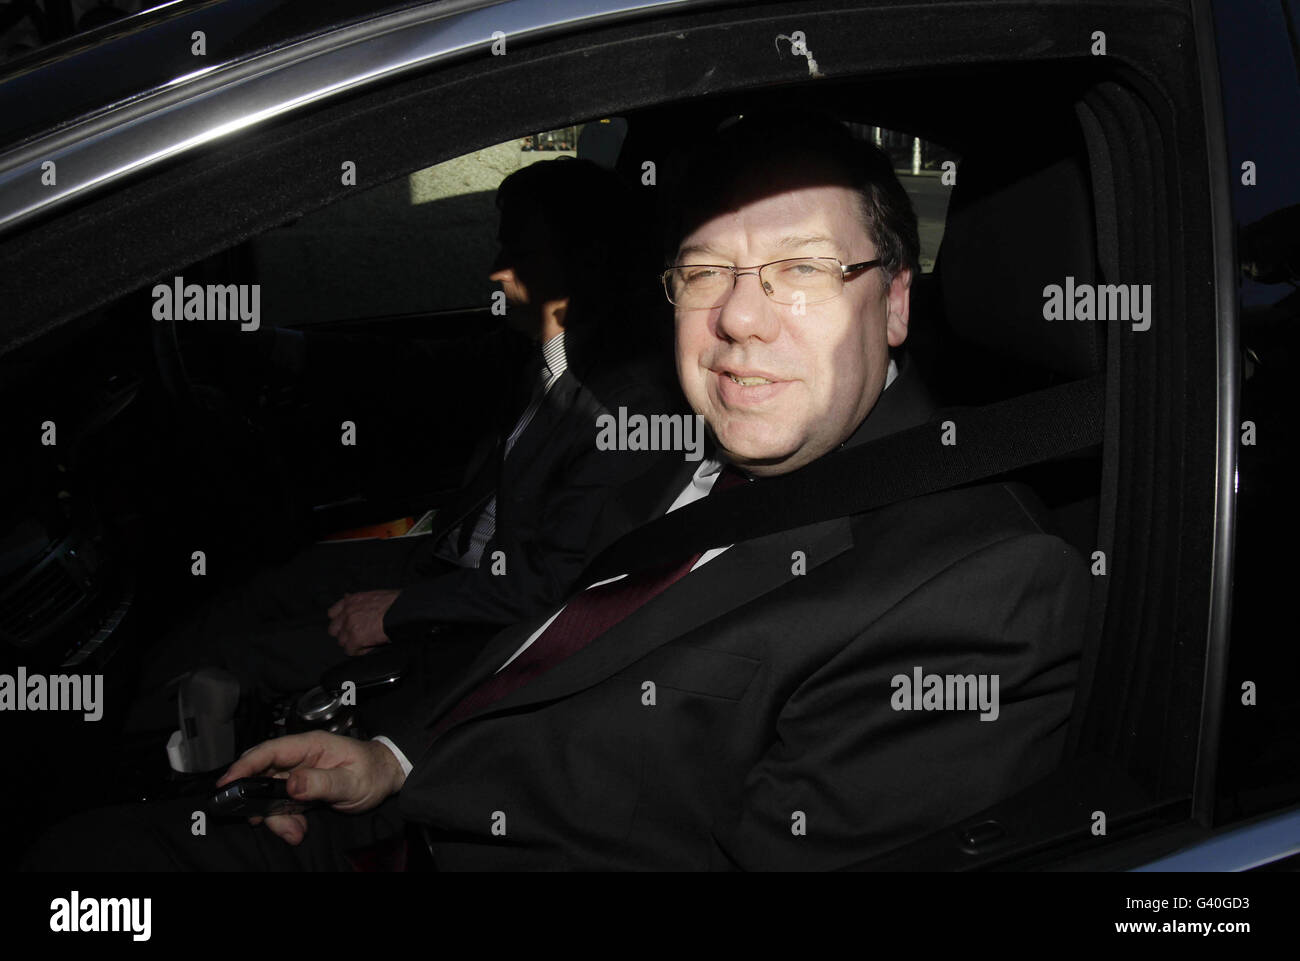 Taoiseach Brian Cowen arrives at Government Buildings in Dublin, after it was announced that he is to make a statement on his future as Fianna Fail leader later today. Stock Photo